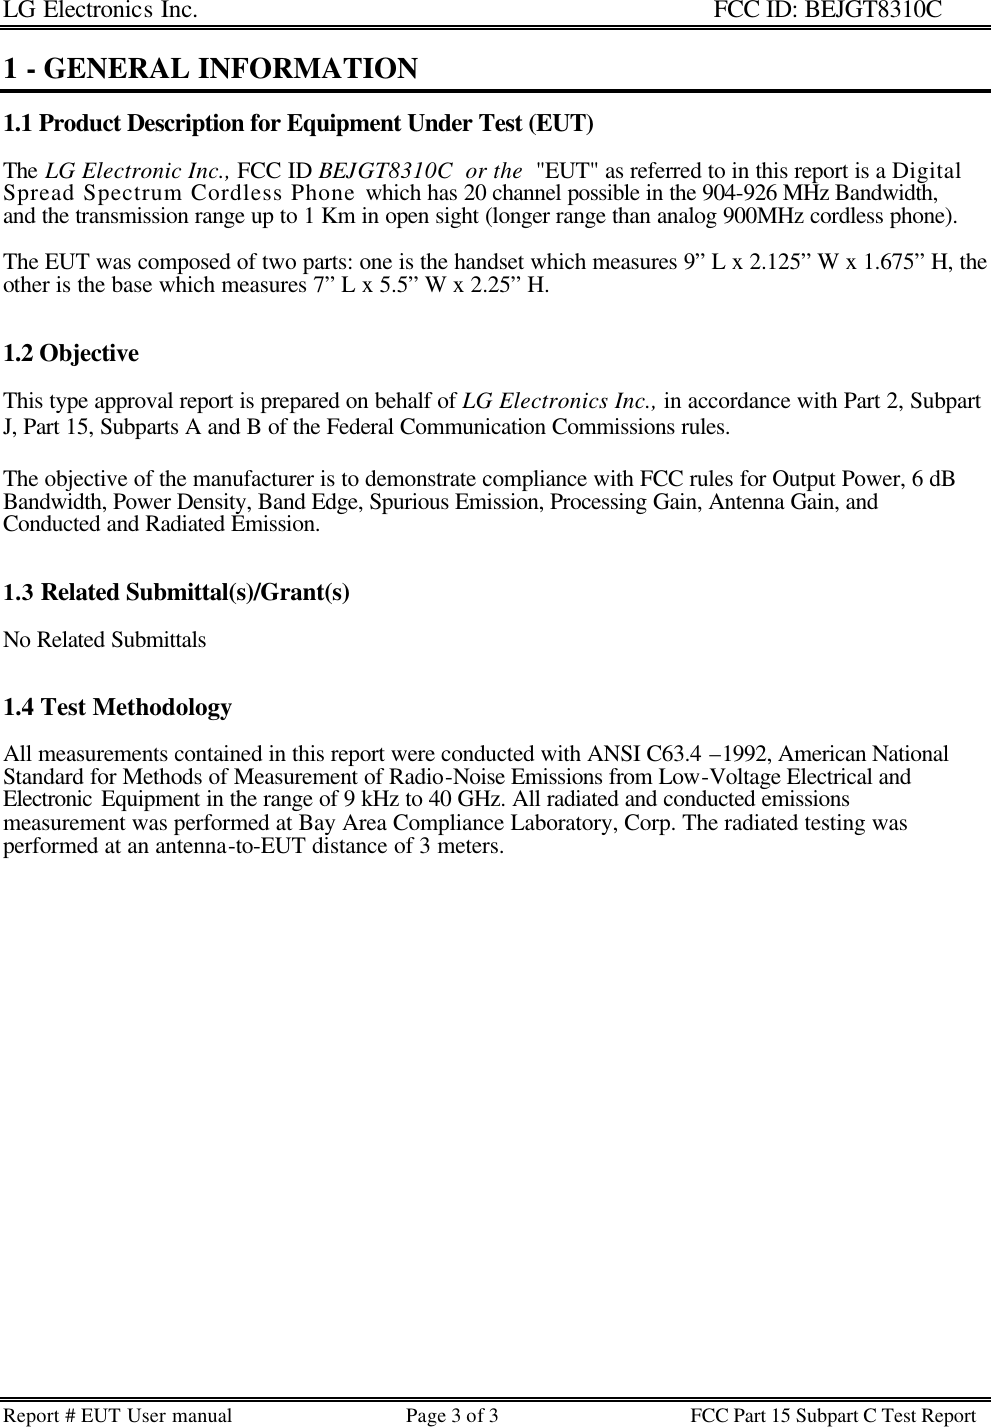 LG Electronics Inc.                                                                                                   FCC ID: BEJGT8310C Report # EUT User manual Page 3 of 3 FCC Part 15 Subpart C Test Report   1 - GENERAL INFORMATION  1.1 Product Description for Equipment Under Test (EUT)  The LG Electronic Inc., FCC ID BEJGT8310C  or the  &quot;EUT&quot; as referred to in this report is a Digital Spread Spectrum Cordless Phone which has 20 channel possible in the 904-926 MHz Bandwidth, and the transmission range up to 1 Km in open sight (longer range than analog 900MHz cordless phone).   The EUT was composed of two parts: one is the handset which measures 9” L x 2.125” W x 1.675” H, the other is the base which measures 7” L x 5.5” W x 2.25” H.   1.2 Objective  This type approval report is prepared on behalf of LG Electronics Inc., in accordance with Part 2, Subpart J, Part 15, Subparts A and B of the Federal Communication Commissions rules.  The objective of the manufacturer is to demonstrate compliance with FCC rules for Output Power, 6 dB Bandwidth, Power Density, Band Edge, Spurious Emission, Processing Gain, Antenna Gain, and Conducted and Radiated Emission.   1.3 Related Submittal(s)/Grant(s)  No Related Submittals   1.4 Test Methodology  All measurements contained in this report were conducted with ANSI C63.4 –1992, American National Standard for Methods of Measurement of Radio-Noise Emissions from Low-Voltage Electrical and Electronic Equipment in the range of 9 kHz to 40 GHz. All radiated and conducted emissions measurement was performed at Bay Area Compliance Laboratory, Corp. The radiated testing was performed at an antenna-to-EUT distance of 3 meters.  